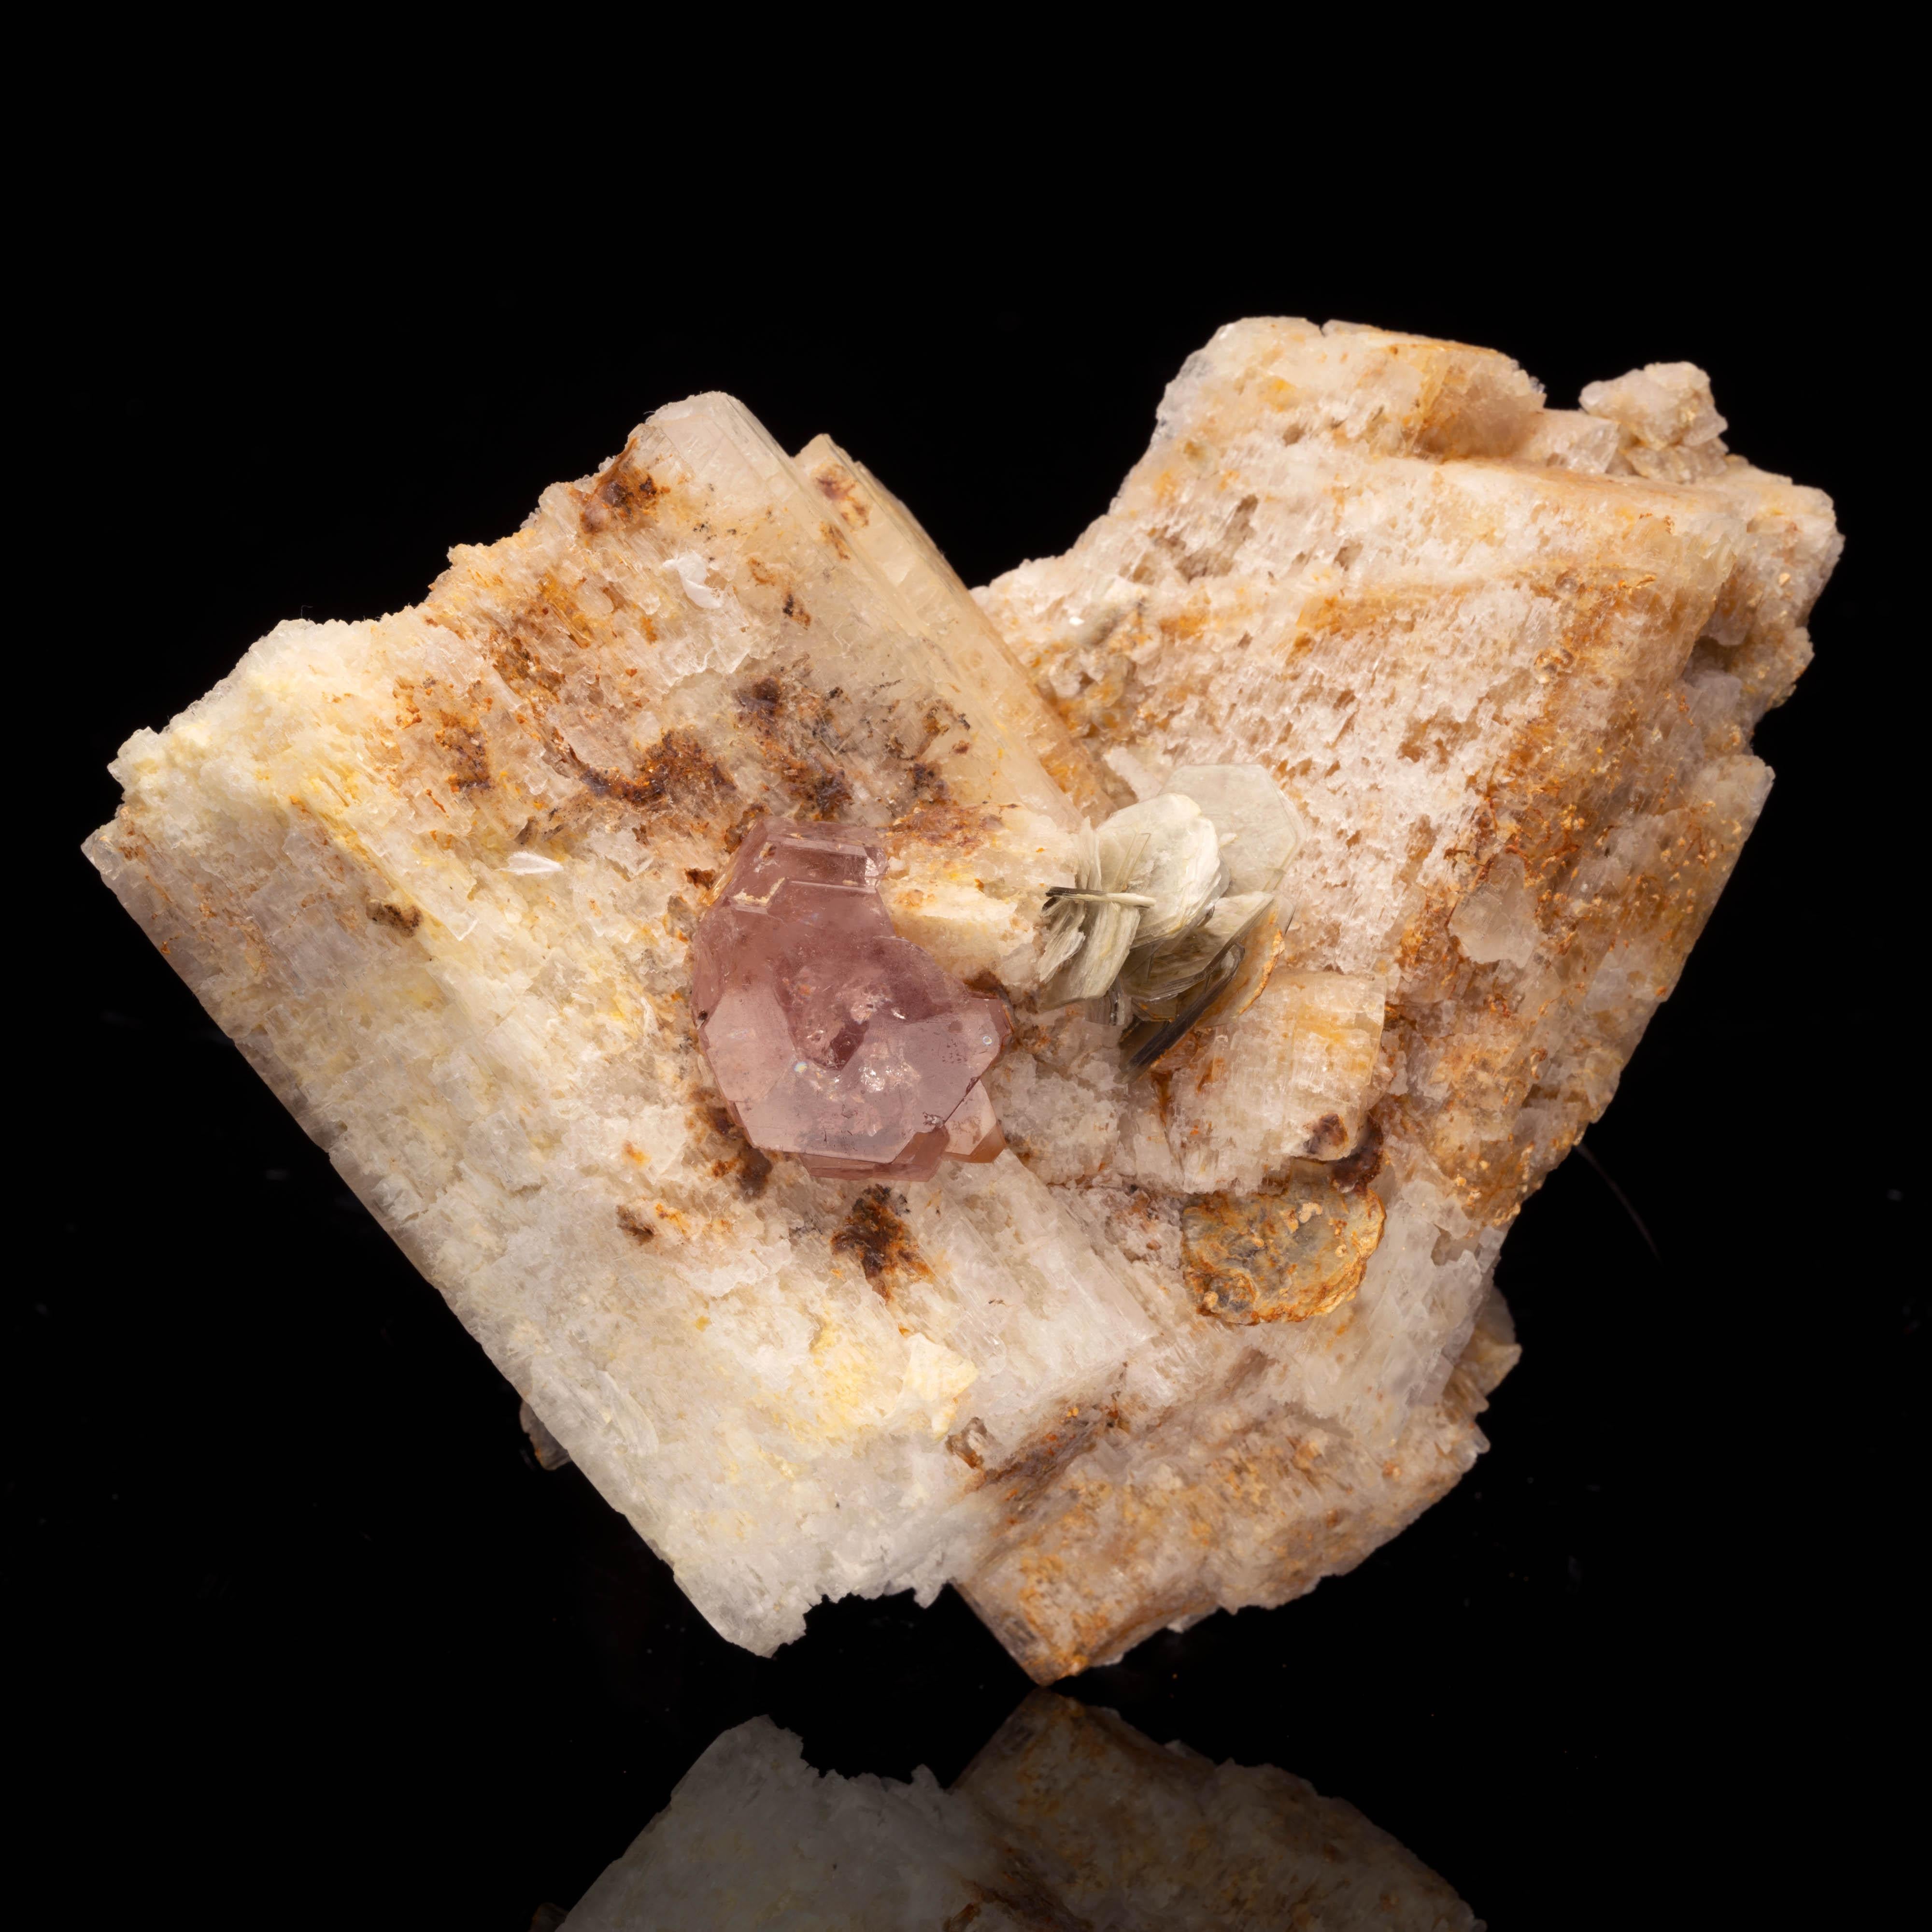 This unique specimen from Pakistan features one deeply pigmented and beautifully formed gemmy pink apatite crystal accompanied by lustrous flakes of muscovite accenting a contrastingly pale, sculptural bed of microcline. A combination piece with